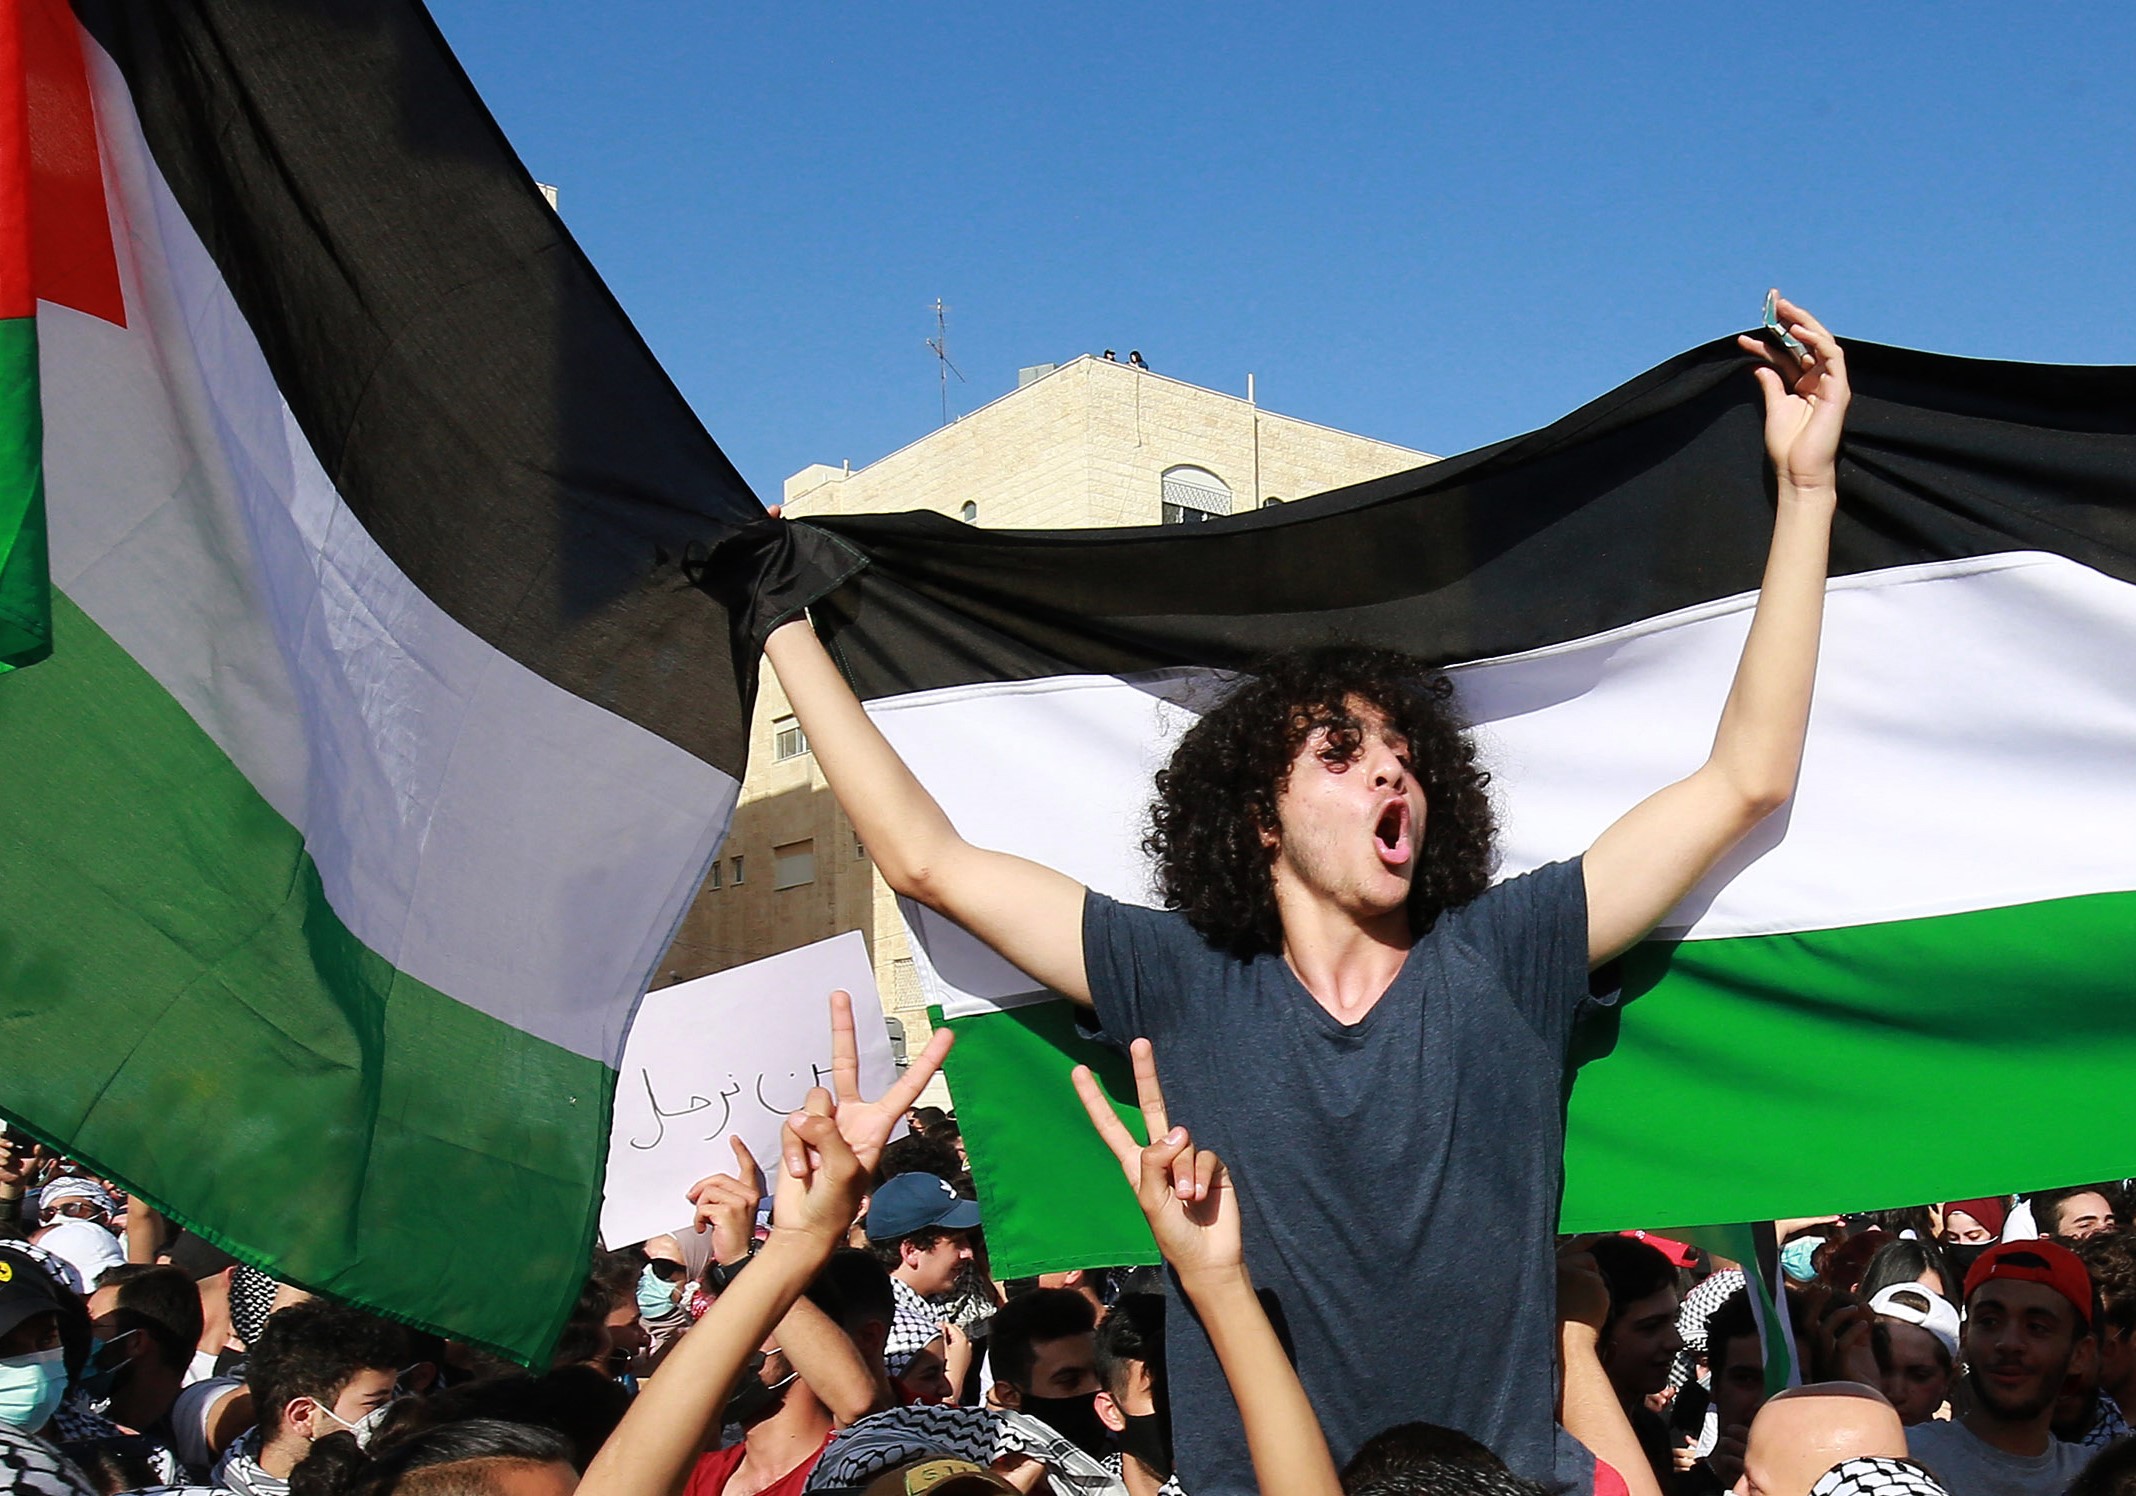 Protesters chant slogans and wave Palestinian flags as they gather for a demonstration in solidarity with the Palestinian people near the Israeli embassy in Jordan's capital Amman on May 11, 2021.